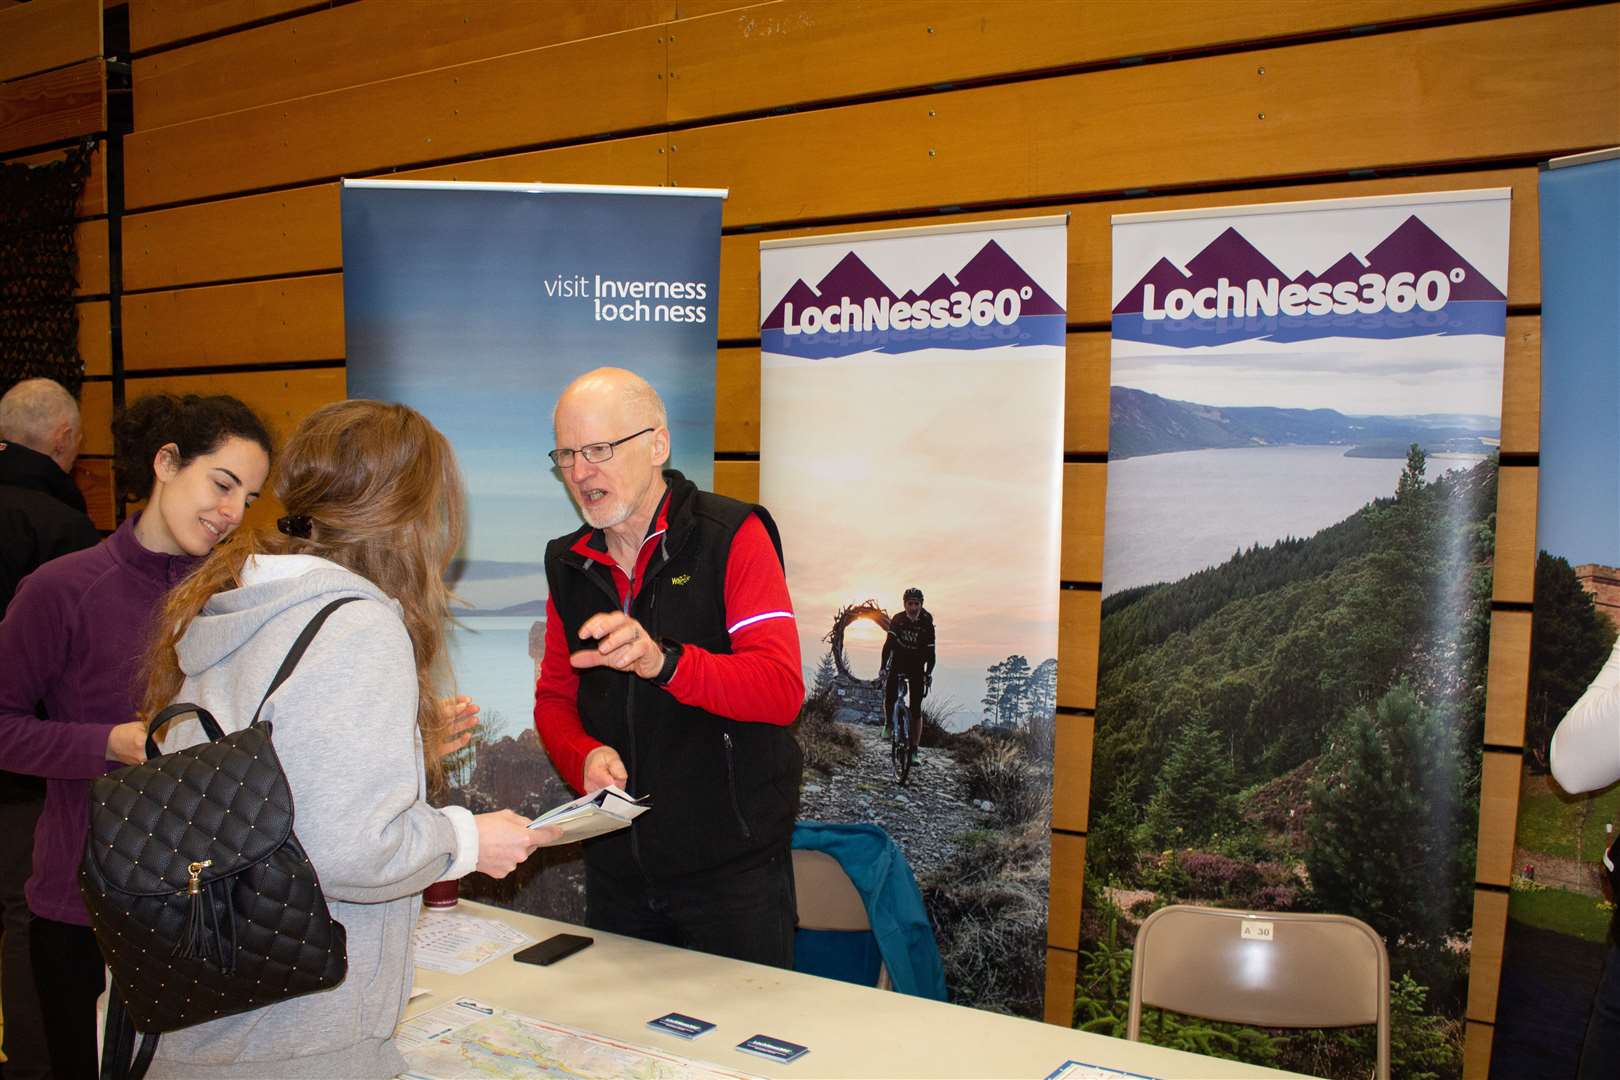 There was plenty of interest at the Loch Ness 360 stall.